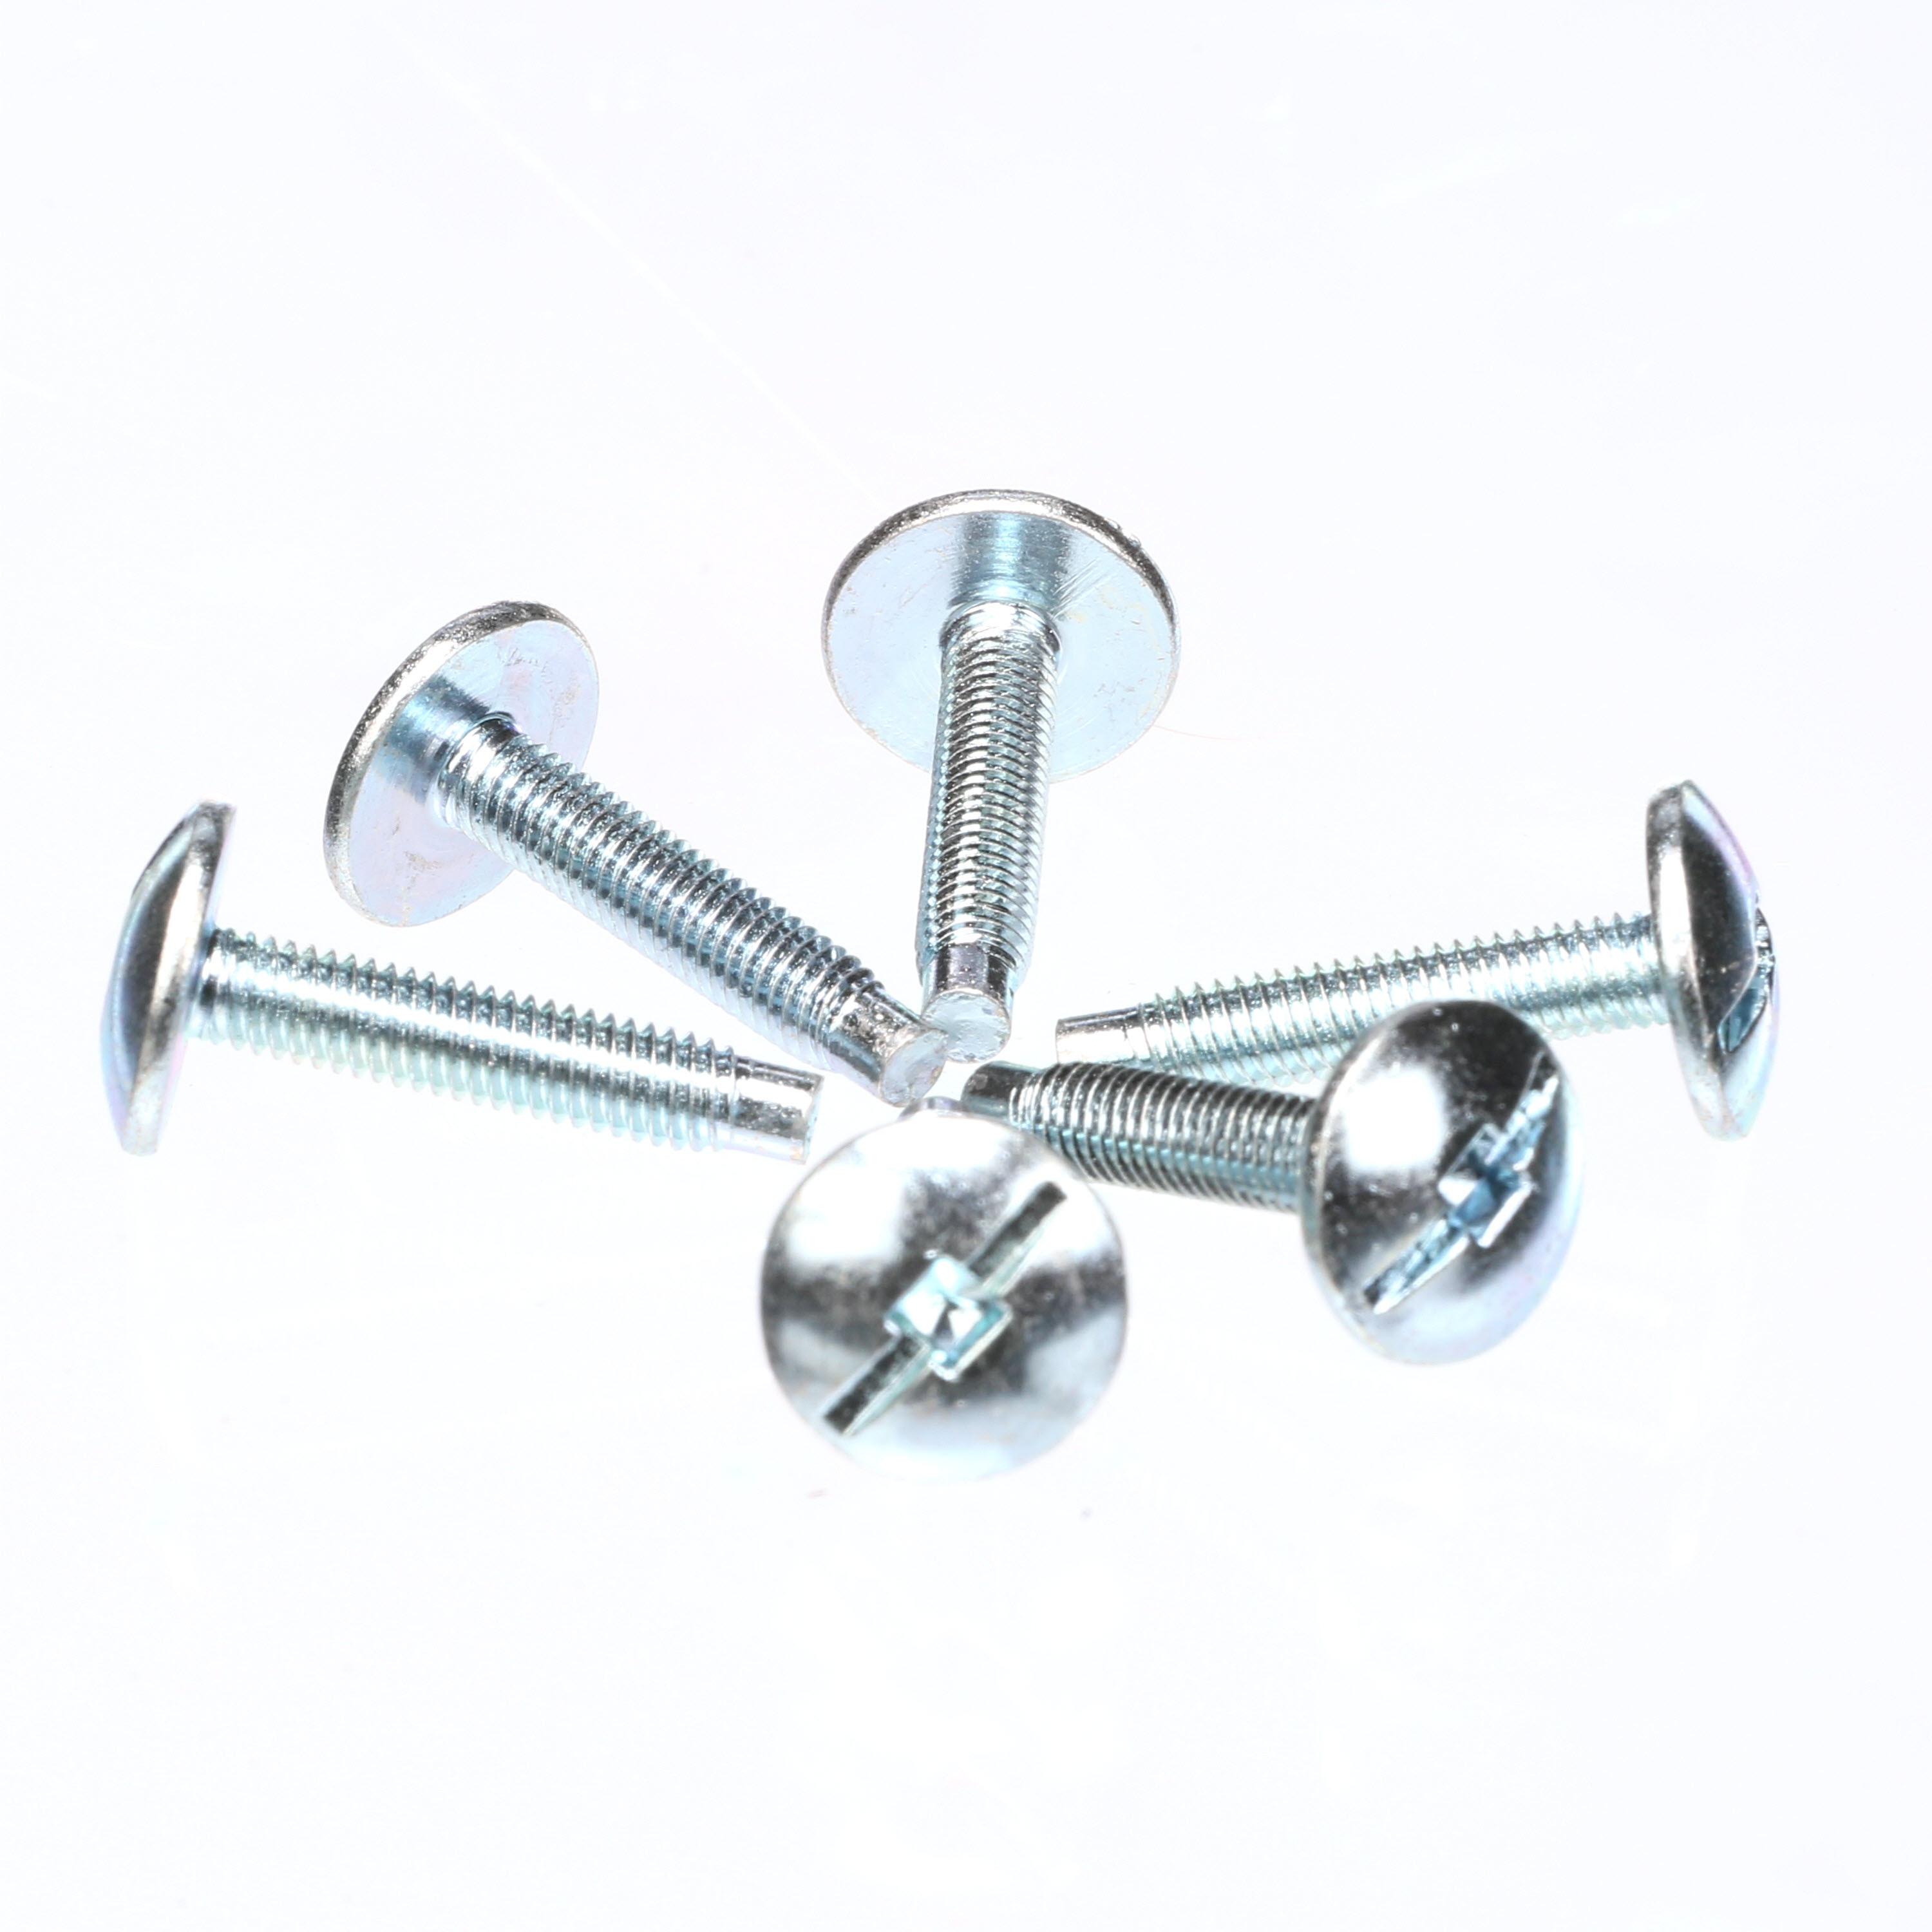 Siemens ECTS2 Cover Screws for Siemens or Murray Load Centers 